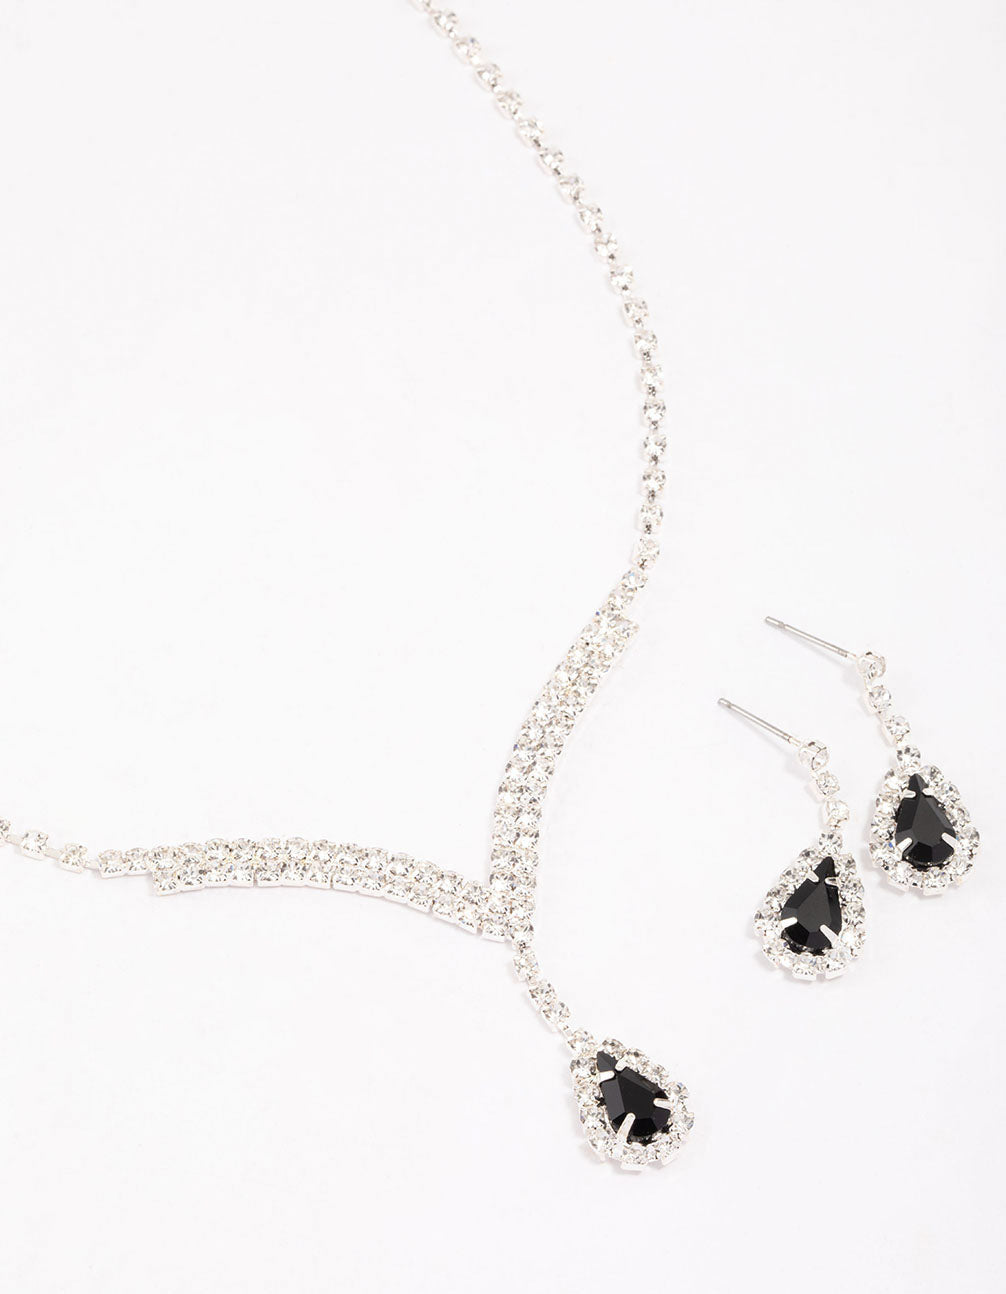 American Diamond Choker with Earrings (Necklace and Earrings Set)